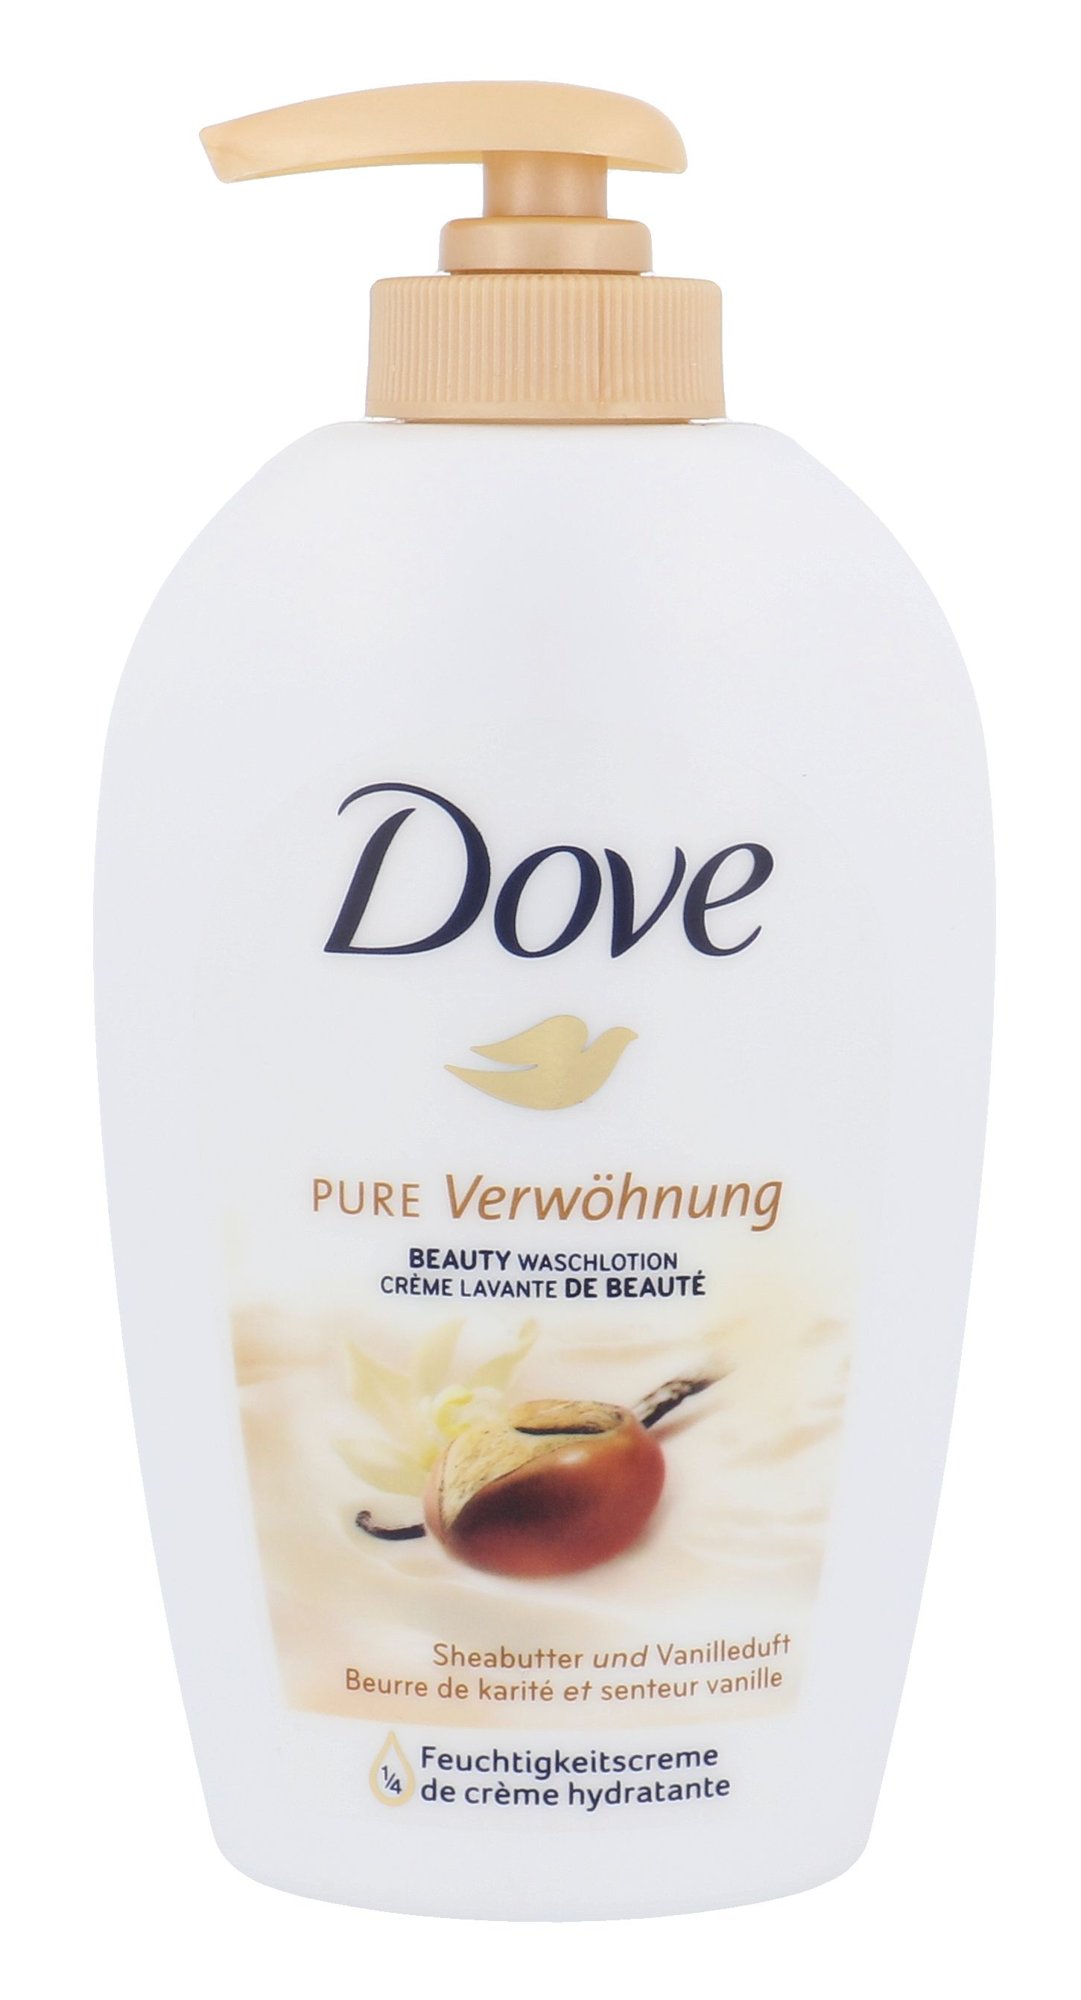 Dove Purely Pampering Shea Butter 250ml skystas muilas